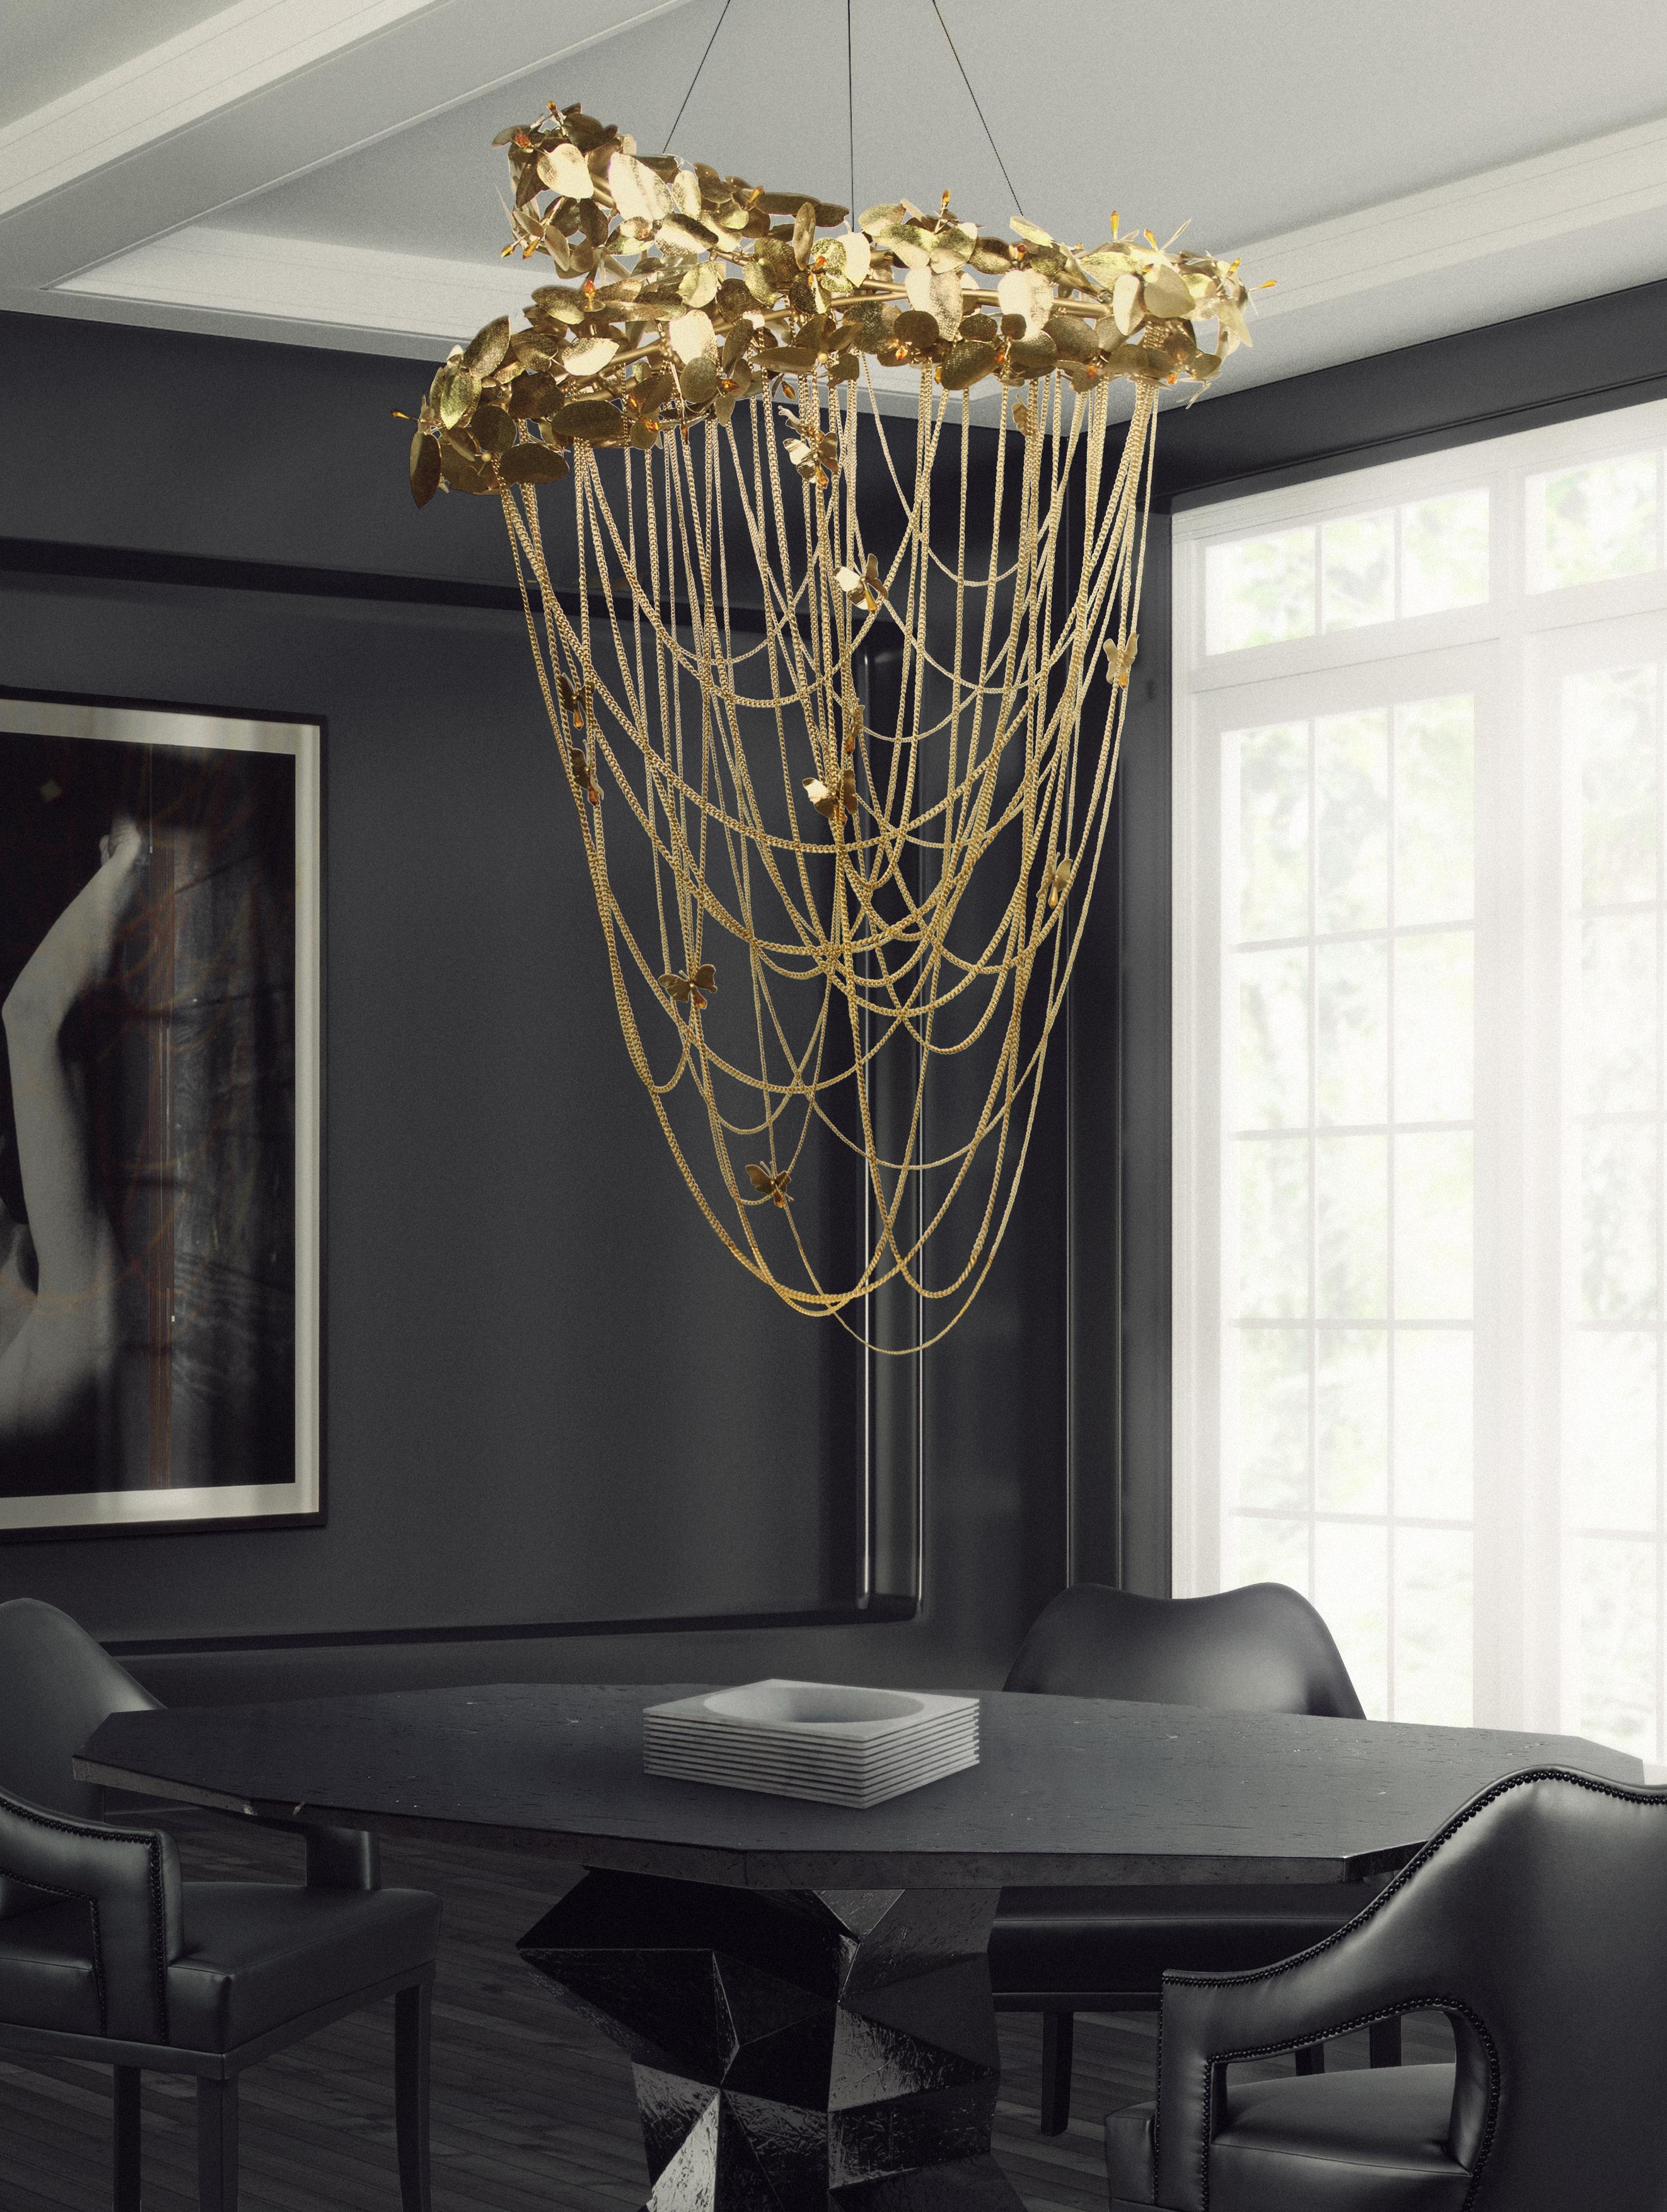 This amazing chandelier is inspired by one of the most irreverent designers of all time, Alexander McQueen. He is known for his dramatic designs and fashion shows. This masterpiece is as powerful as his exhibitions, combining the best luxury with